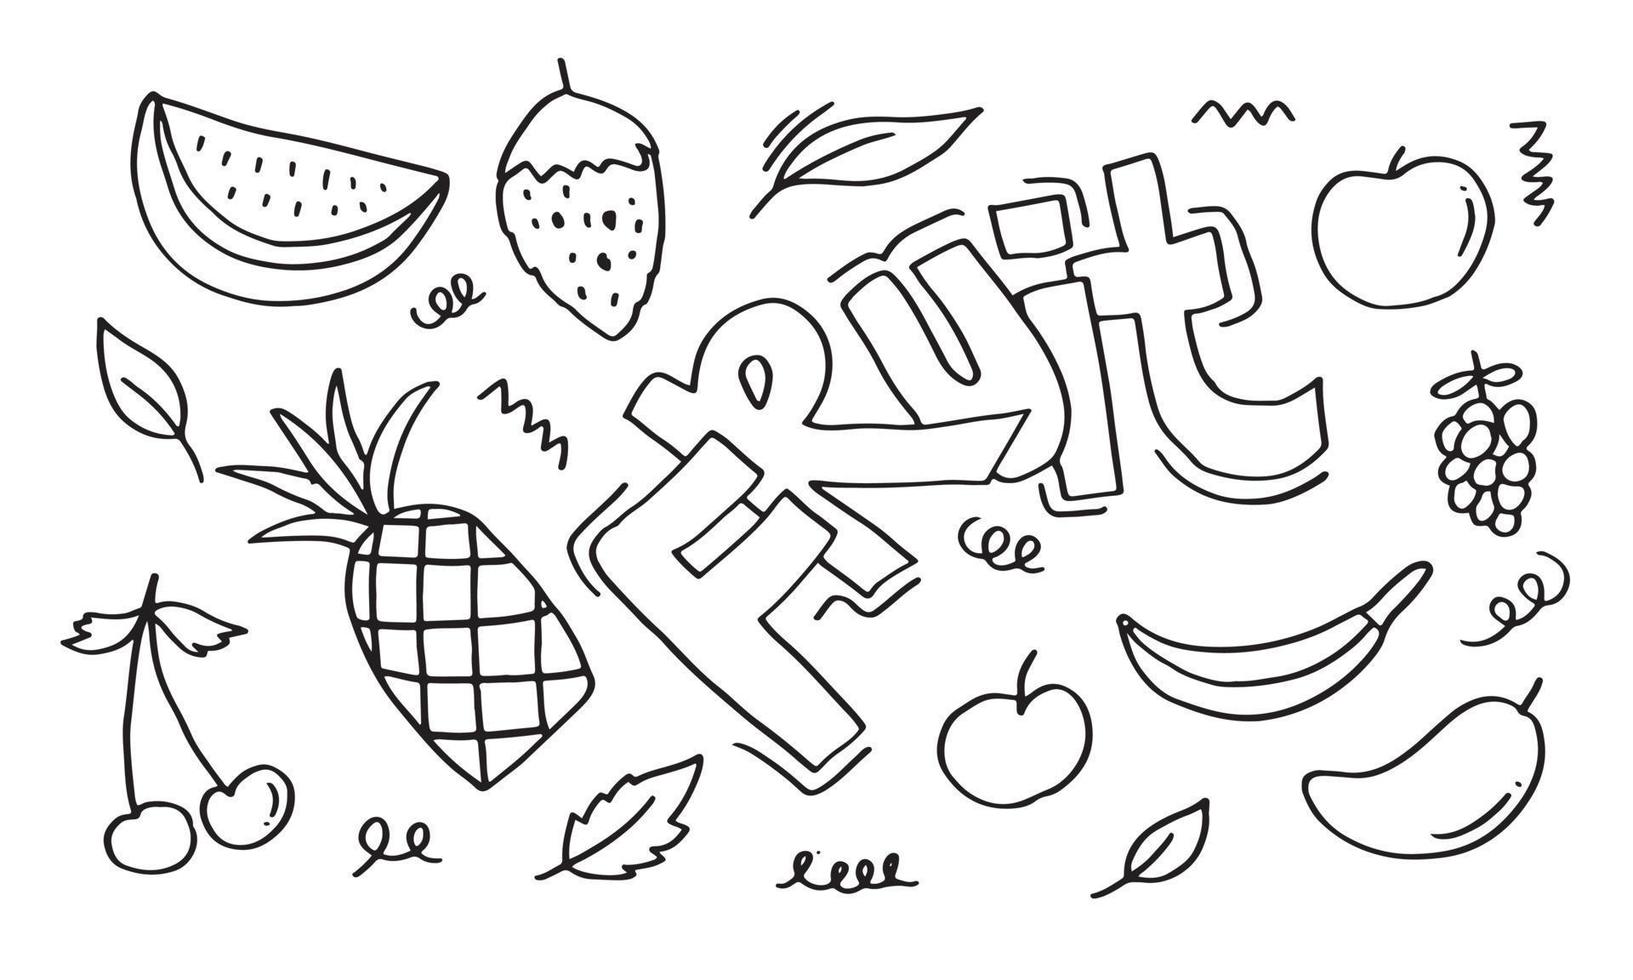 Doodle fruit set. hand drawing of fruits in different styles. vector